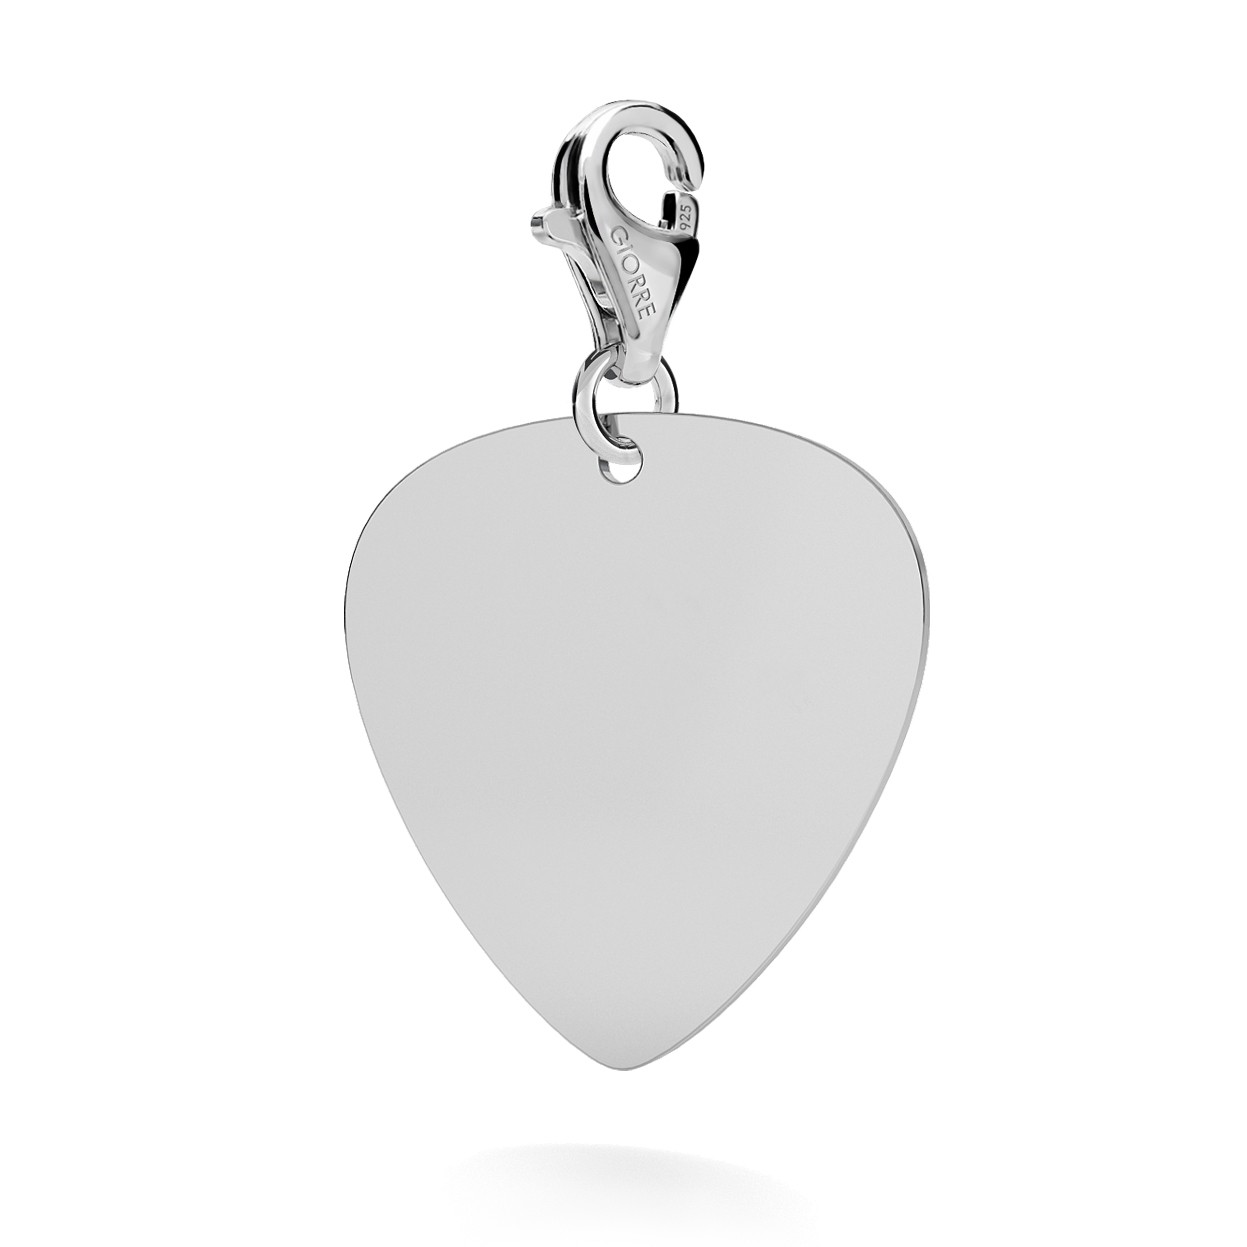 CHARM 112, GUITAR PICK WITH ENGRAVE, STERLING SILVER (925) RHODIUM OR GOLD PLATED